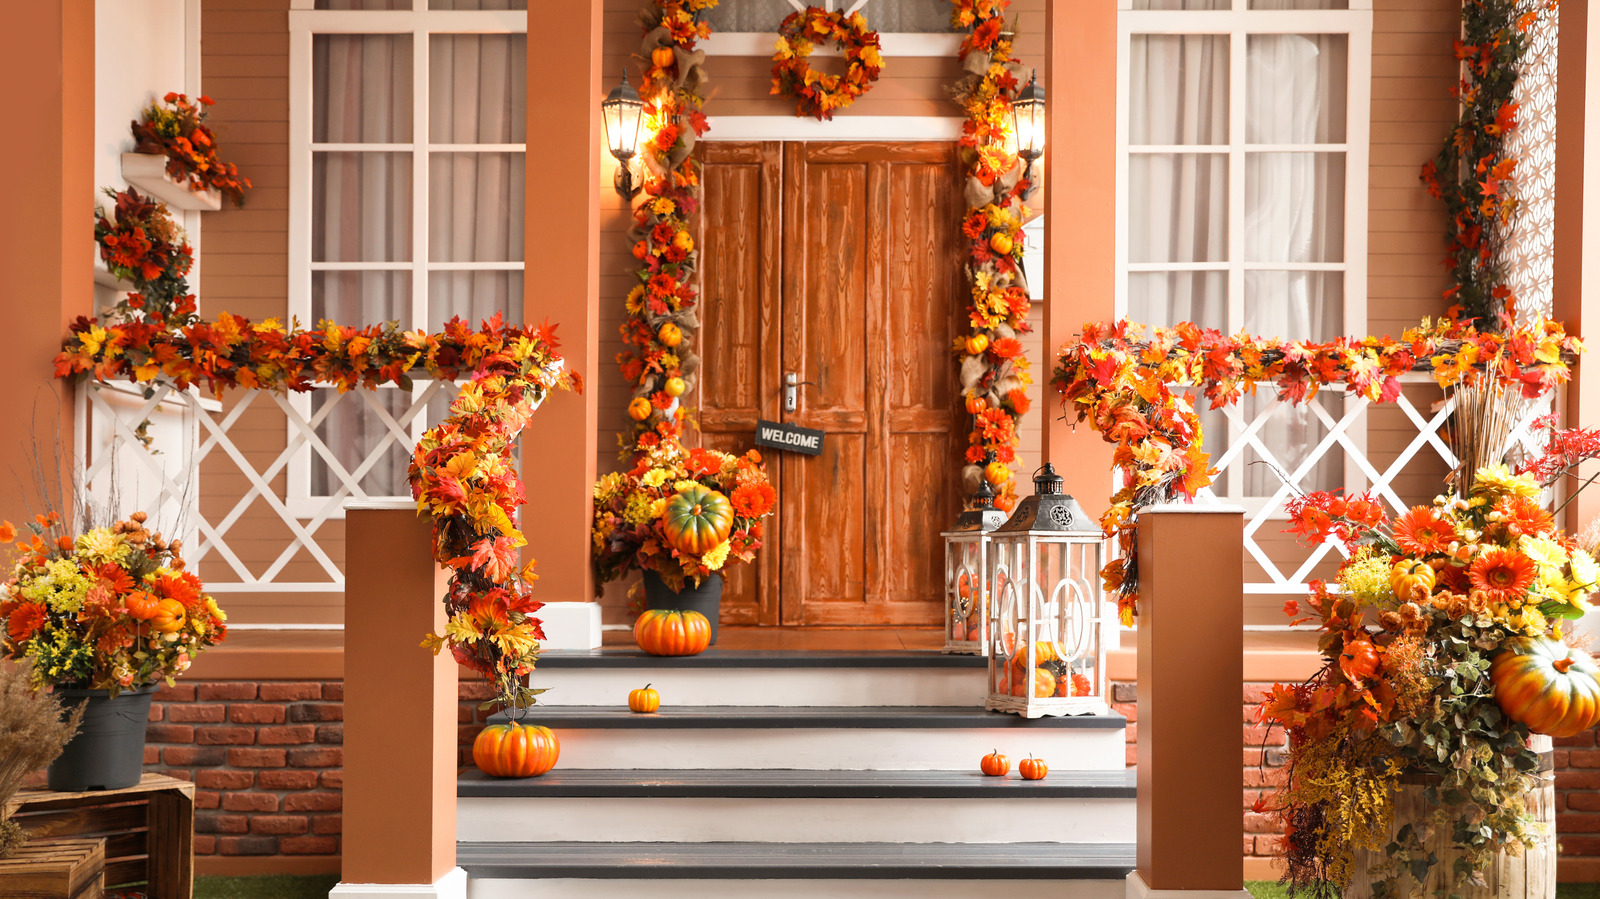 https://www.thelist.com/img/gallery/5-easy-ways-to-get-your-house-ready-for-fall/l-intro-1663371711.jpg